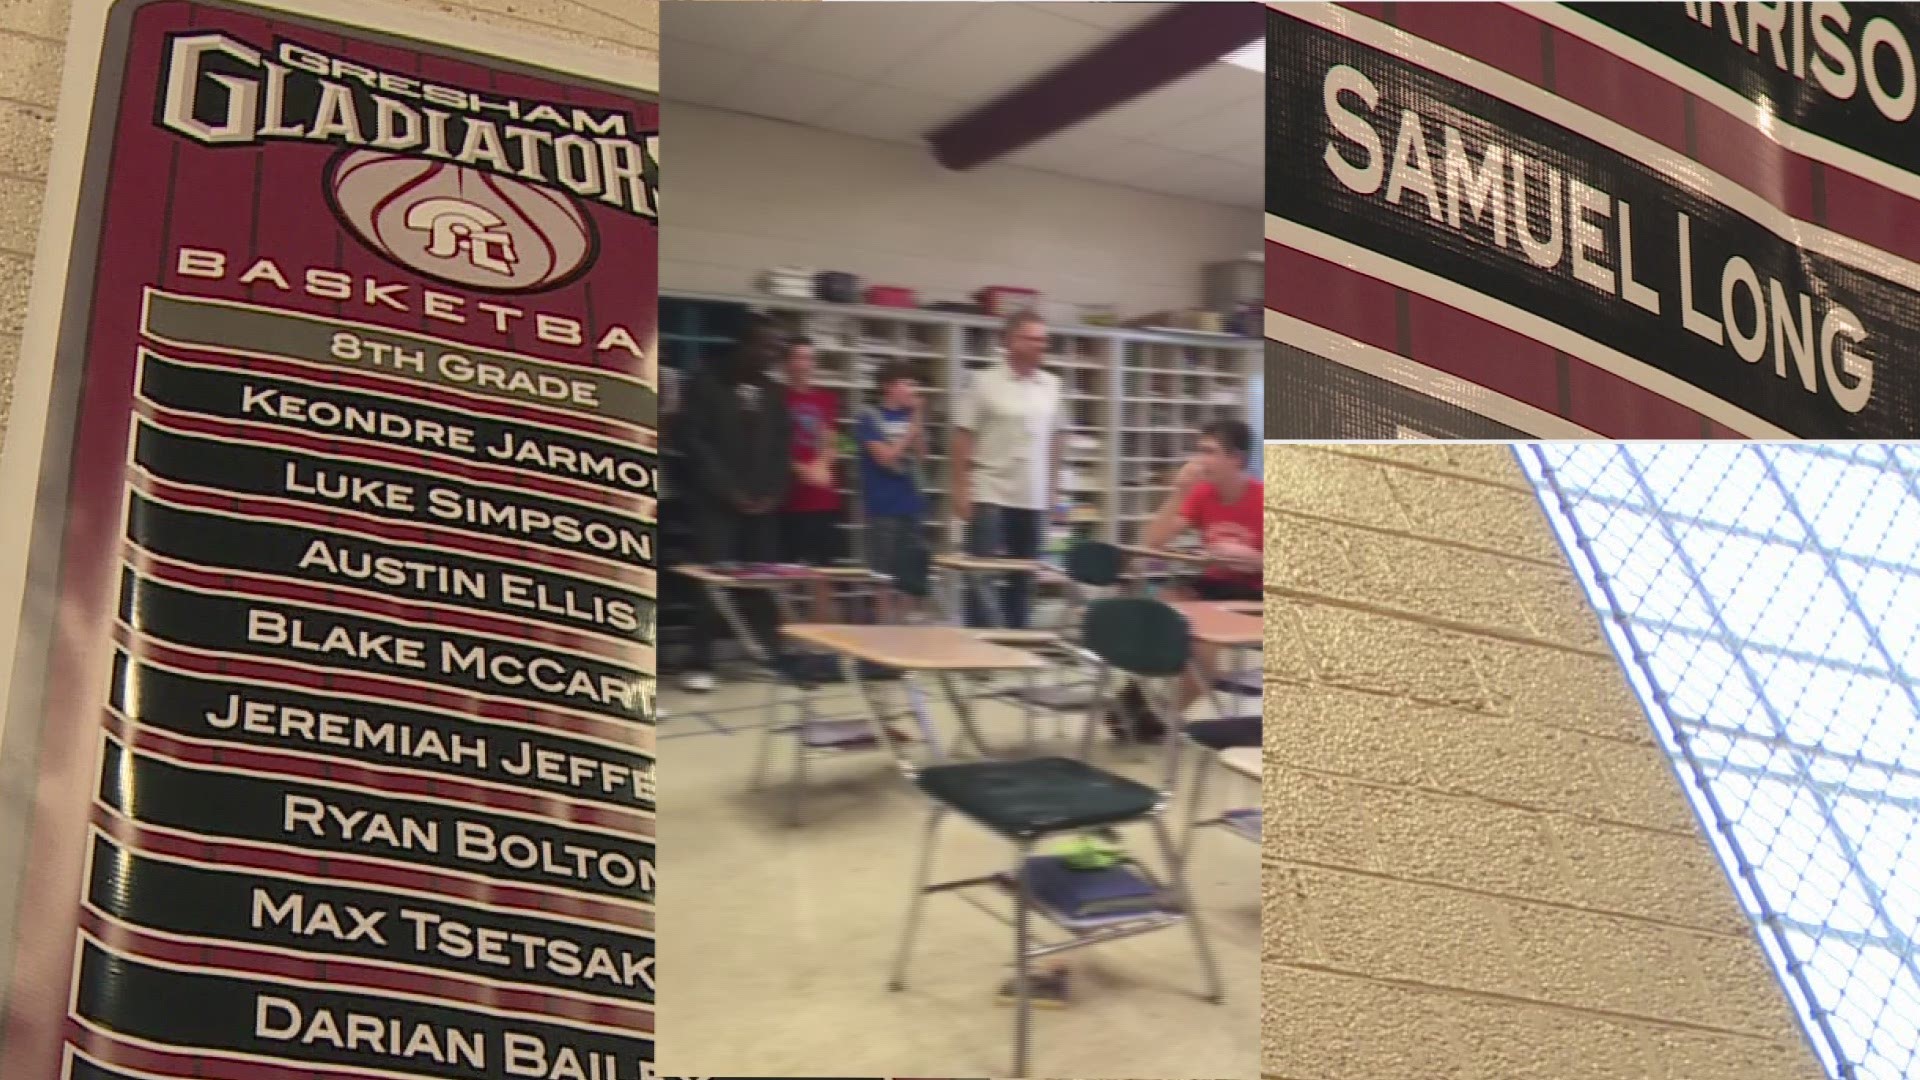 Samuel Long, a Gresham Middle School student with autism, found out he made the basketball team as a player when coach Joel Sampsel and the Gladiators came to Sammy's classroom to present him with his jersey.